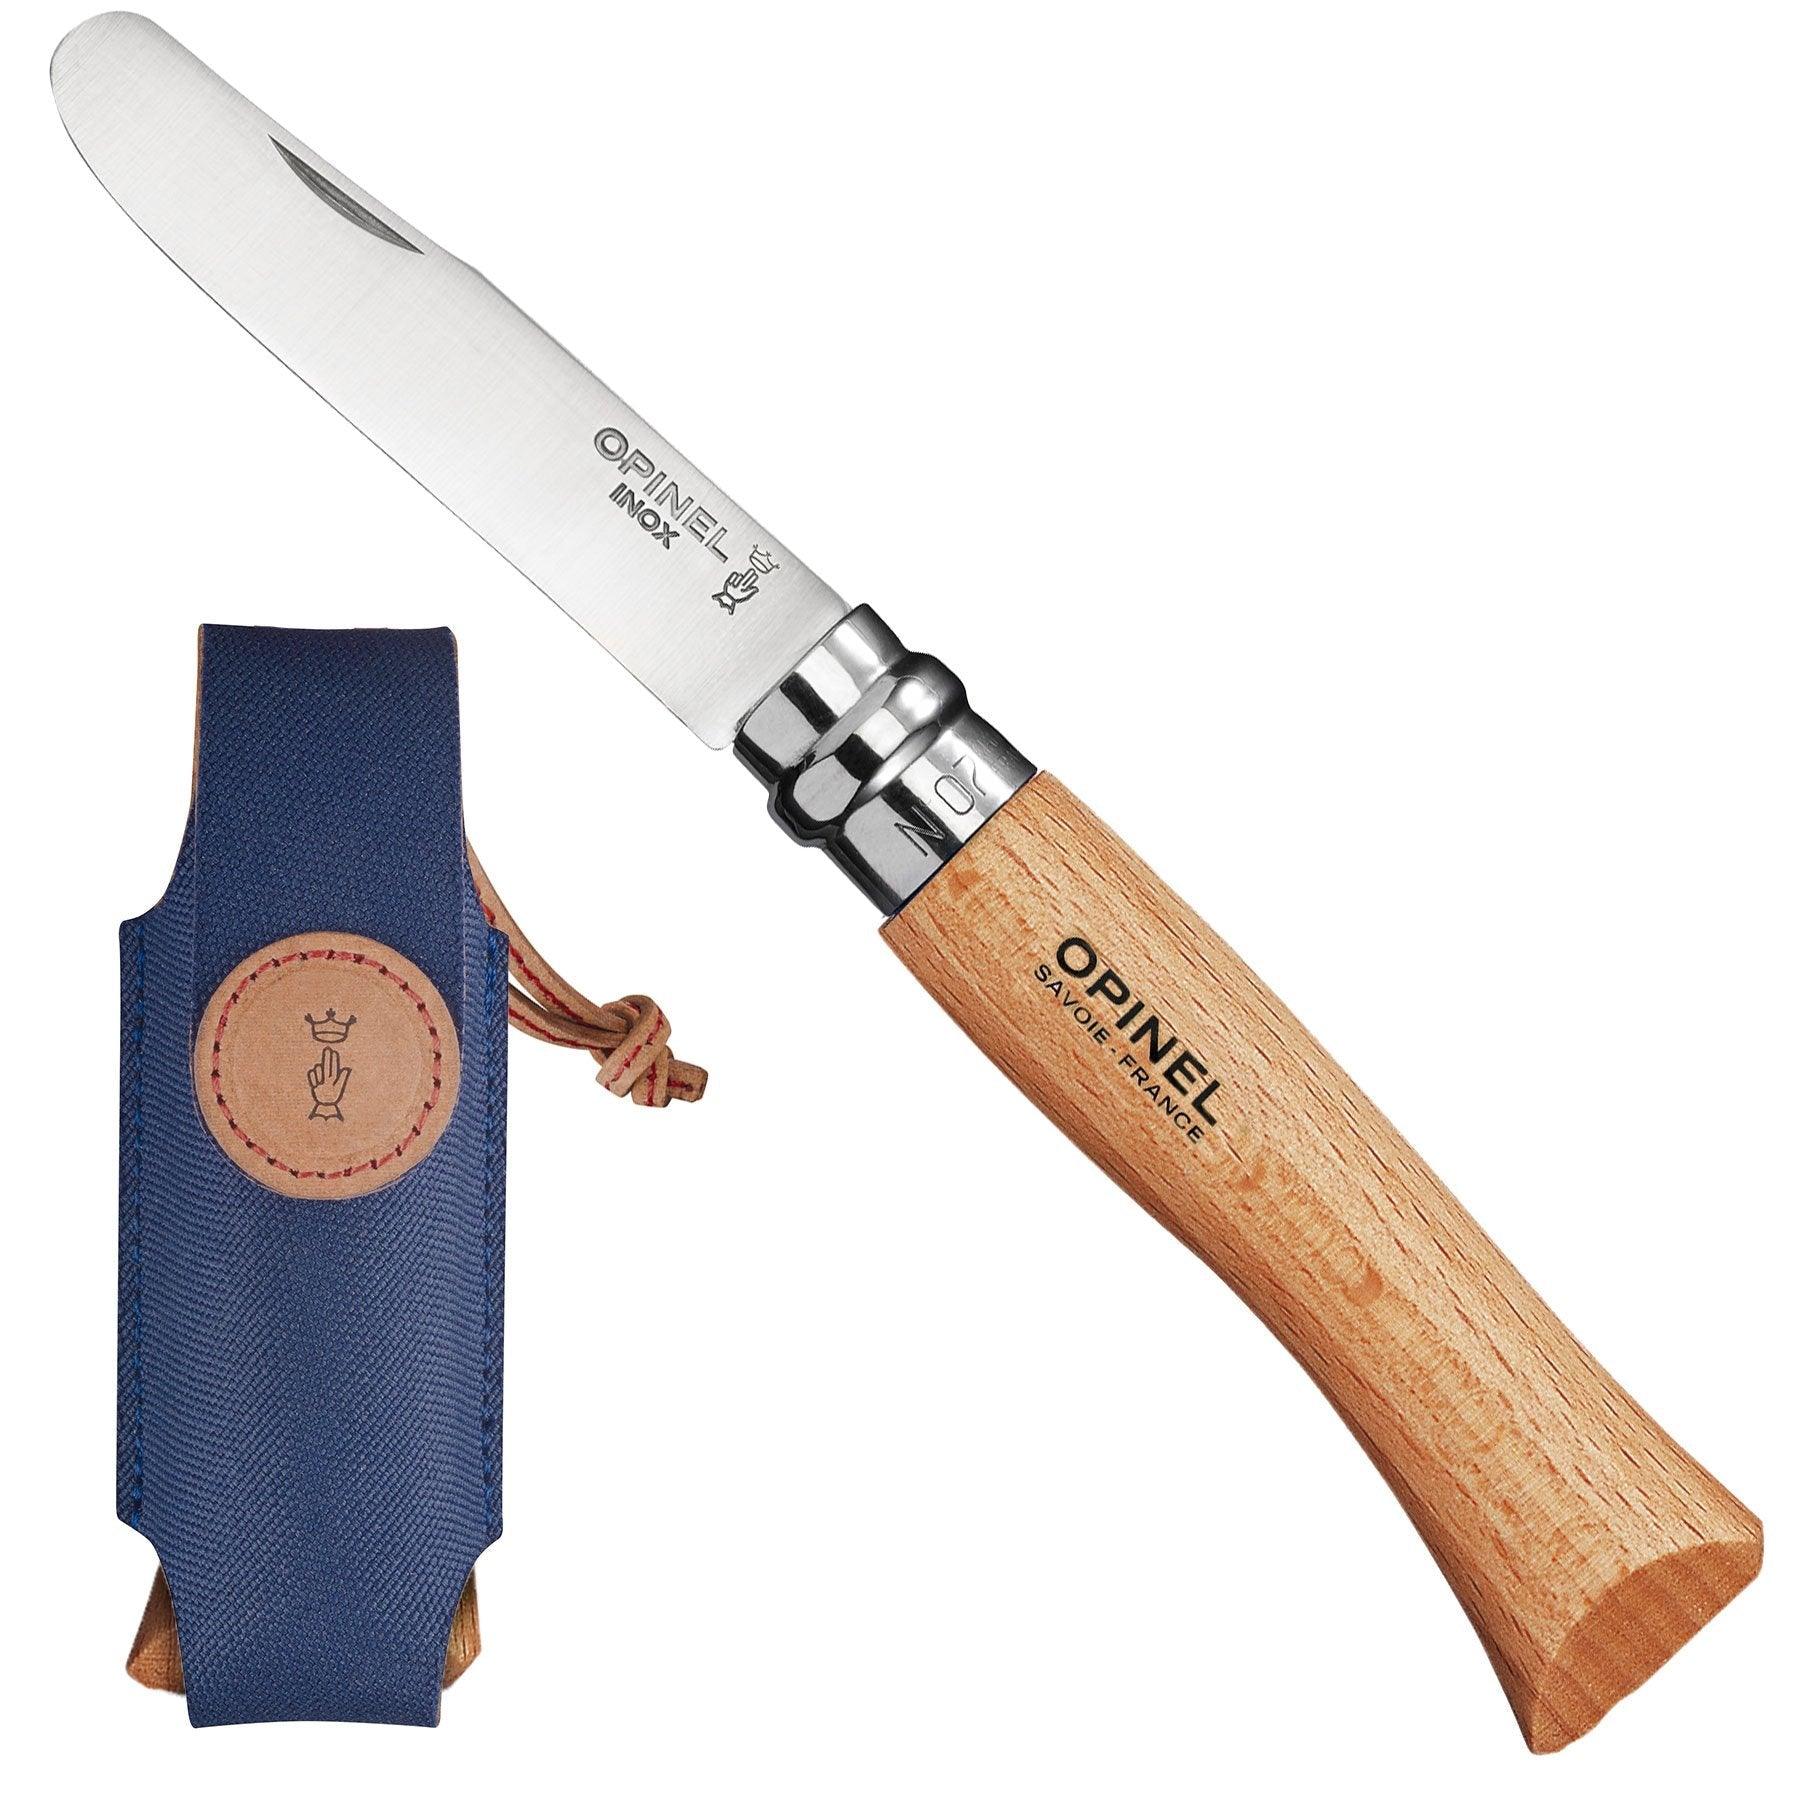 Opinel: My First Opinel knife and case set